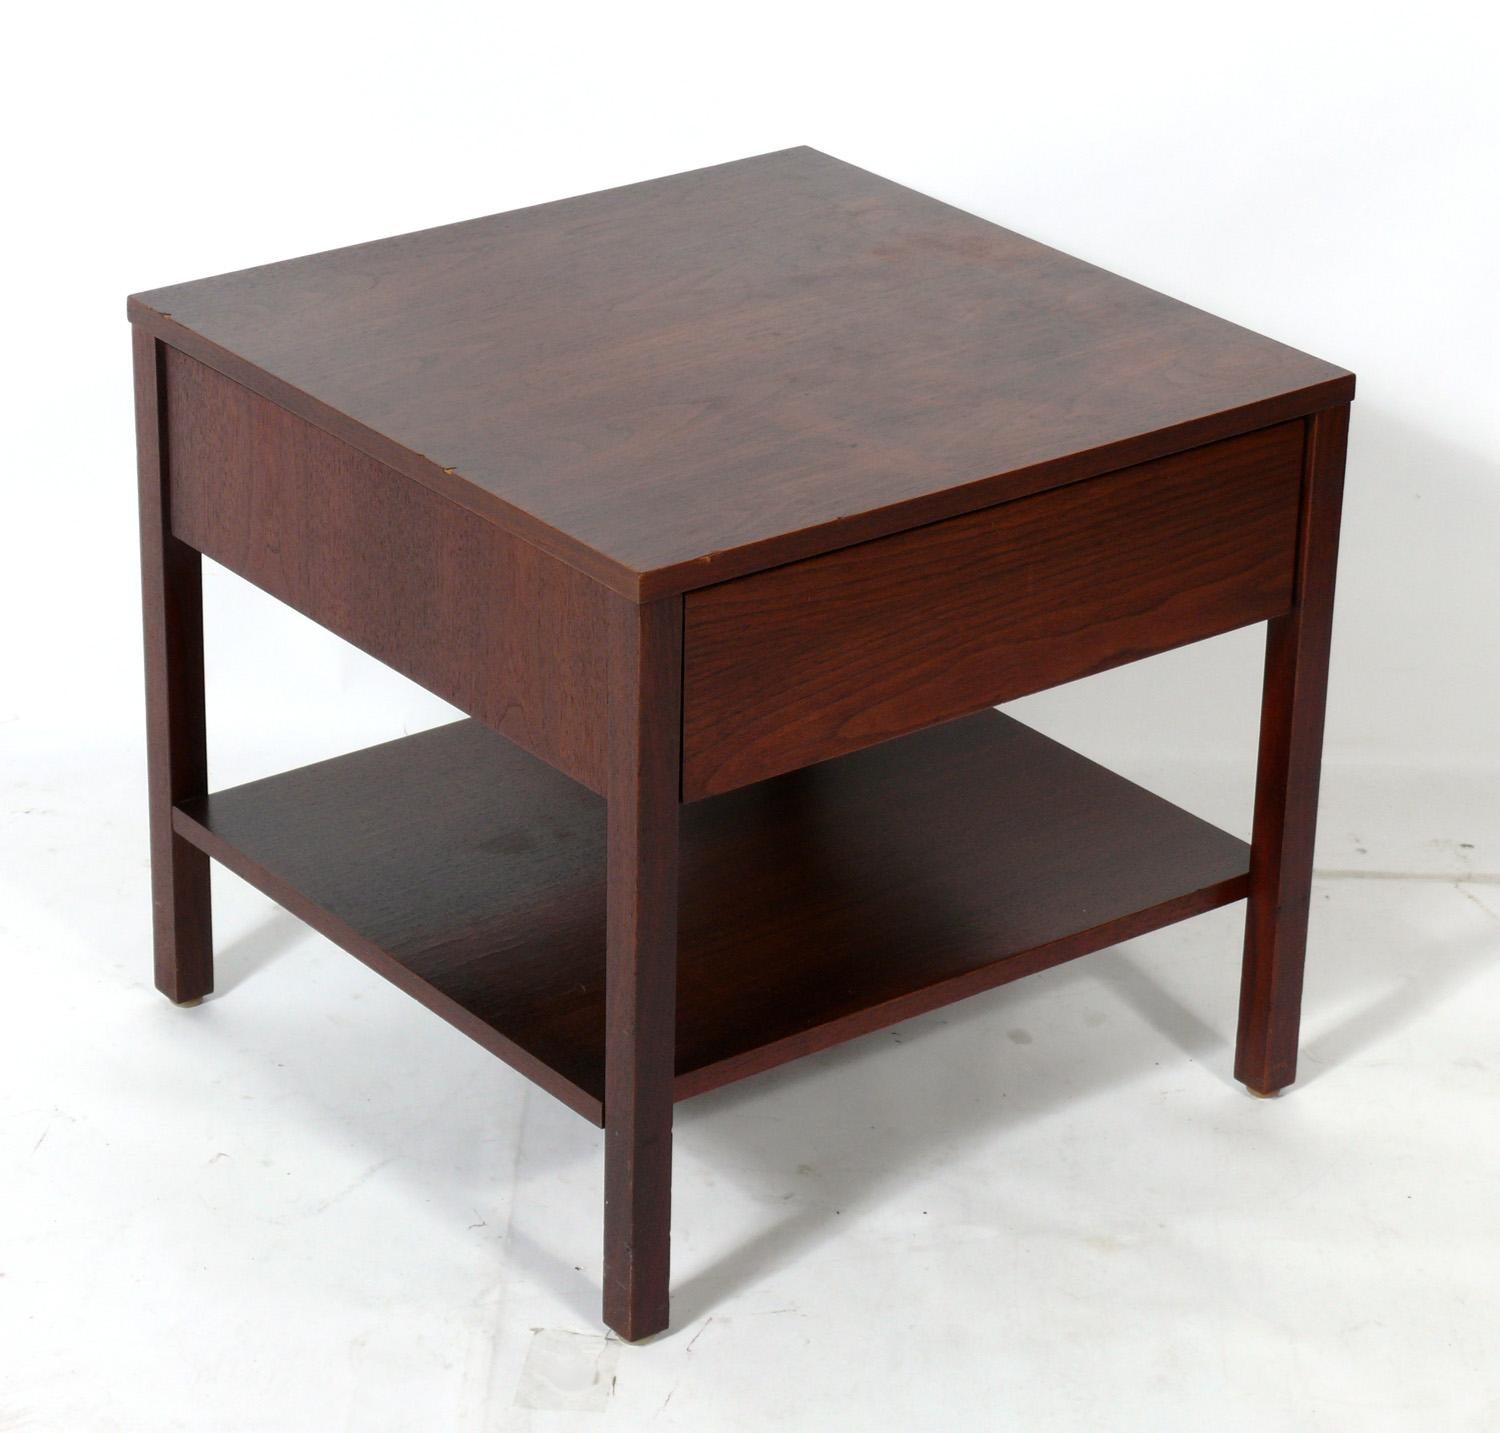 Pair of clean lined walnut night stands or end tables, designed by Florence Knoll for Knoll, American, circa 1950s. They have been cleaned and Danish oiled and are ready to use.